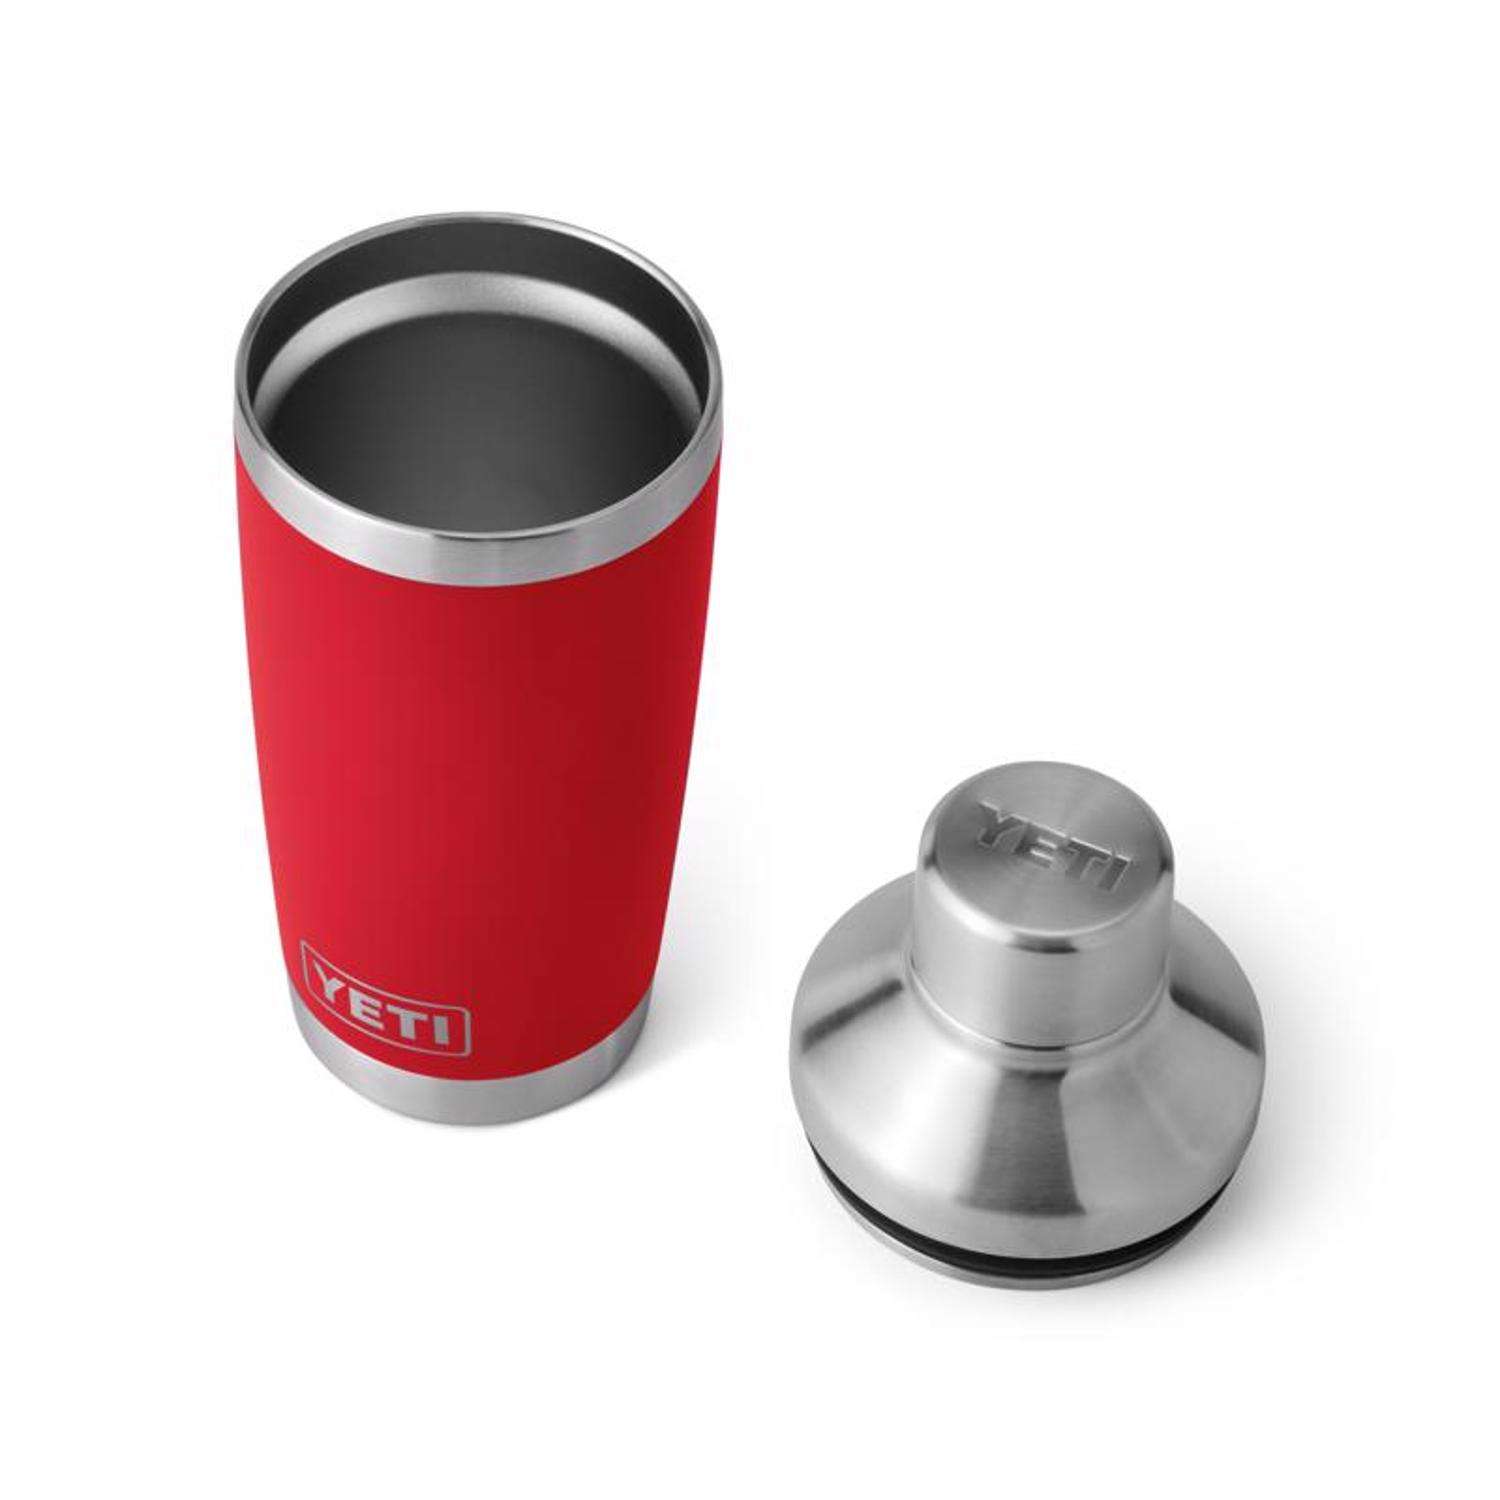  YETI Rambler 20 oz Cocktail Shaker, Stainless Steel, Vacuum  Insulated (Lid Only): Home & Kitchen